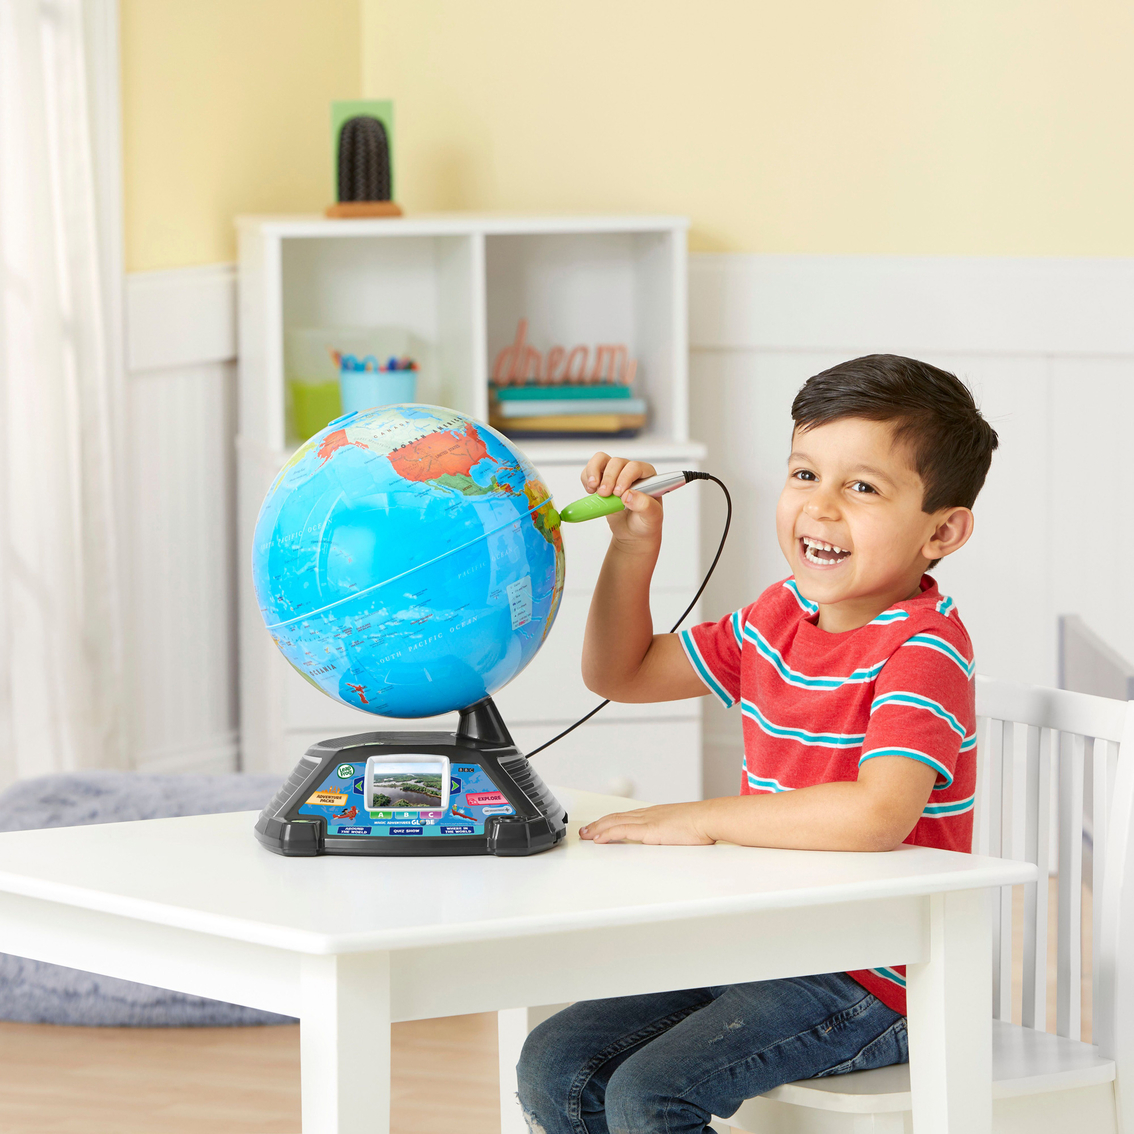 Vtech Magic Adventures Globe, Tablets & Software, Baby & Toys